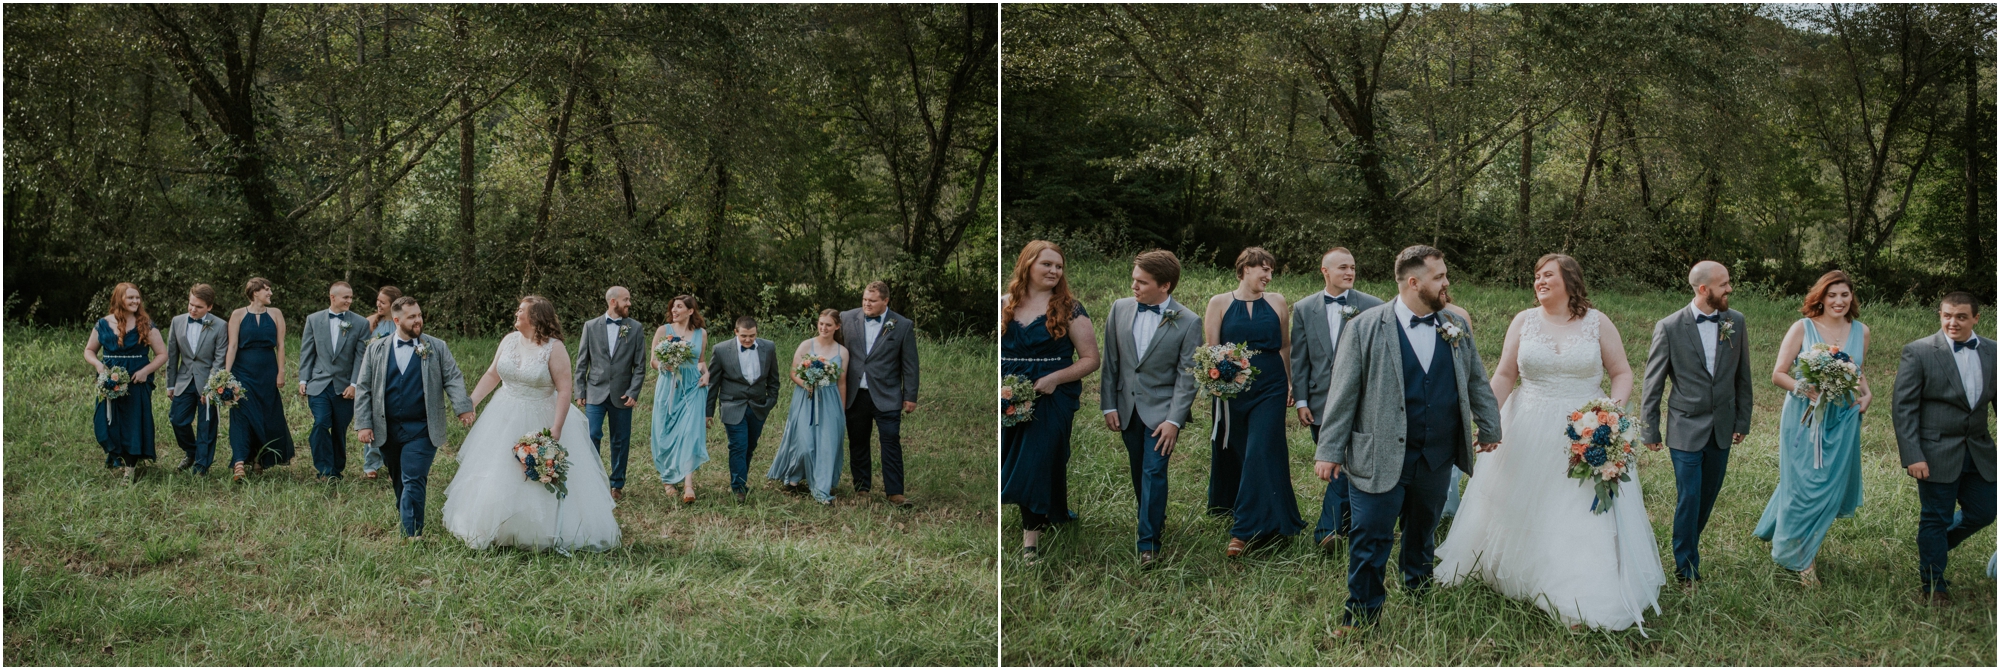 caryville-robbins-middle-tennessee-intimate-cozy-fall-navy-rustic-backyard-wedding_0068.jpg